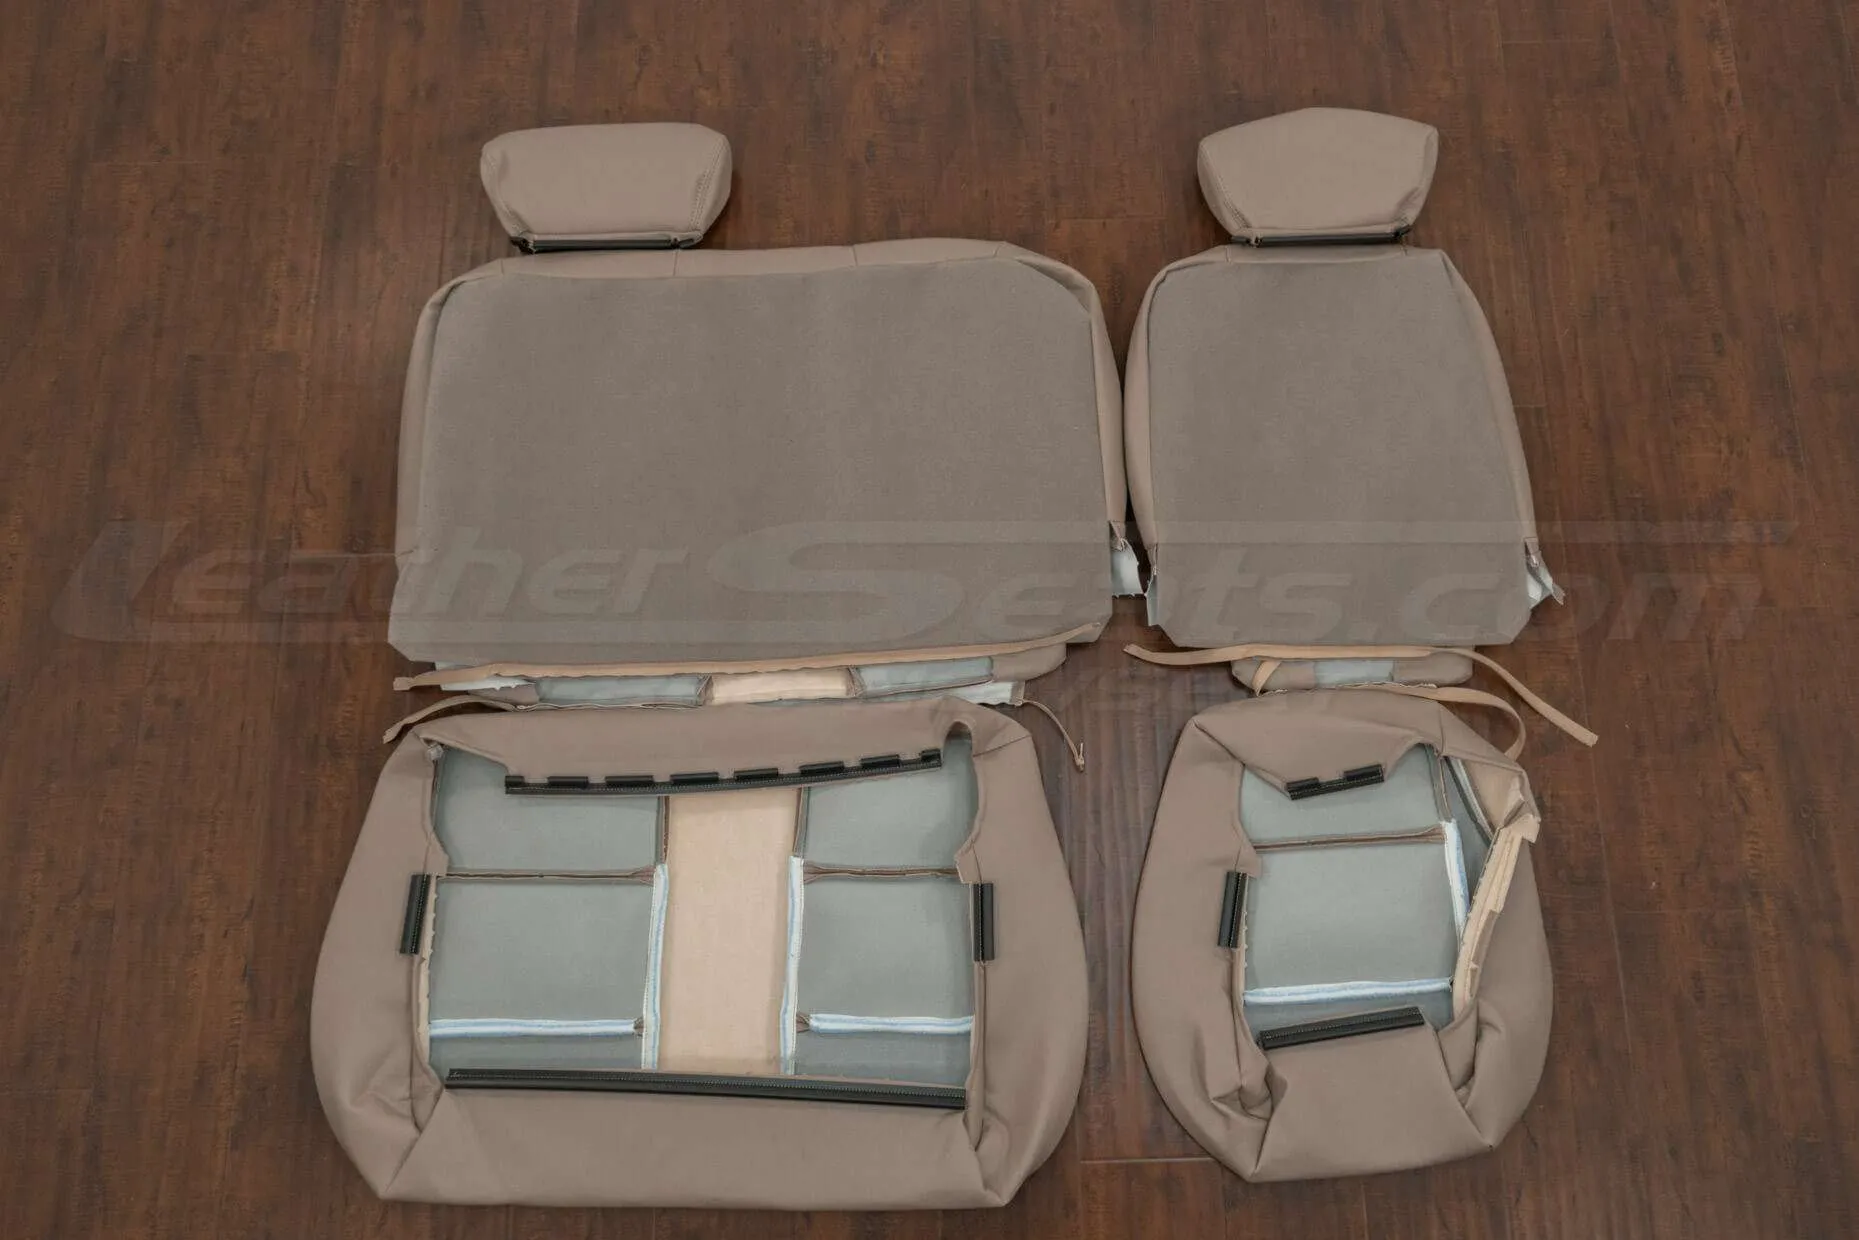 Back view of rear seats